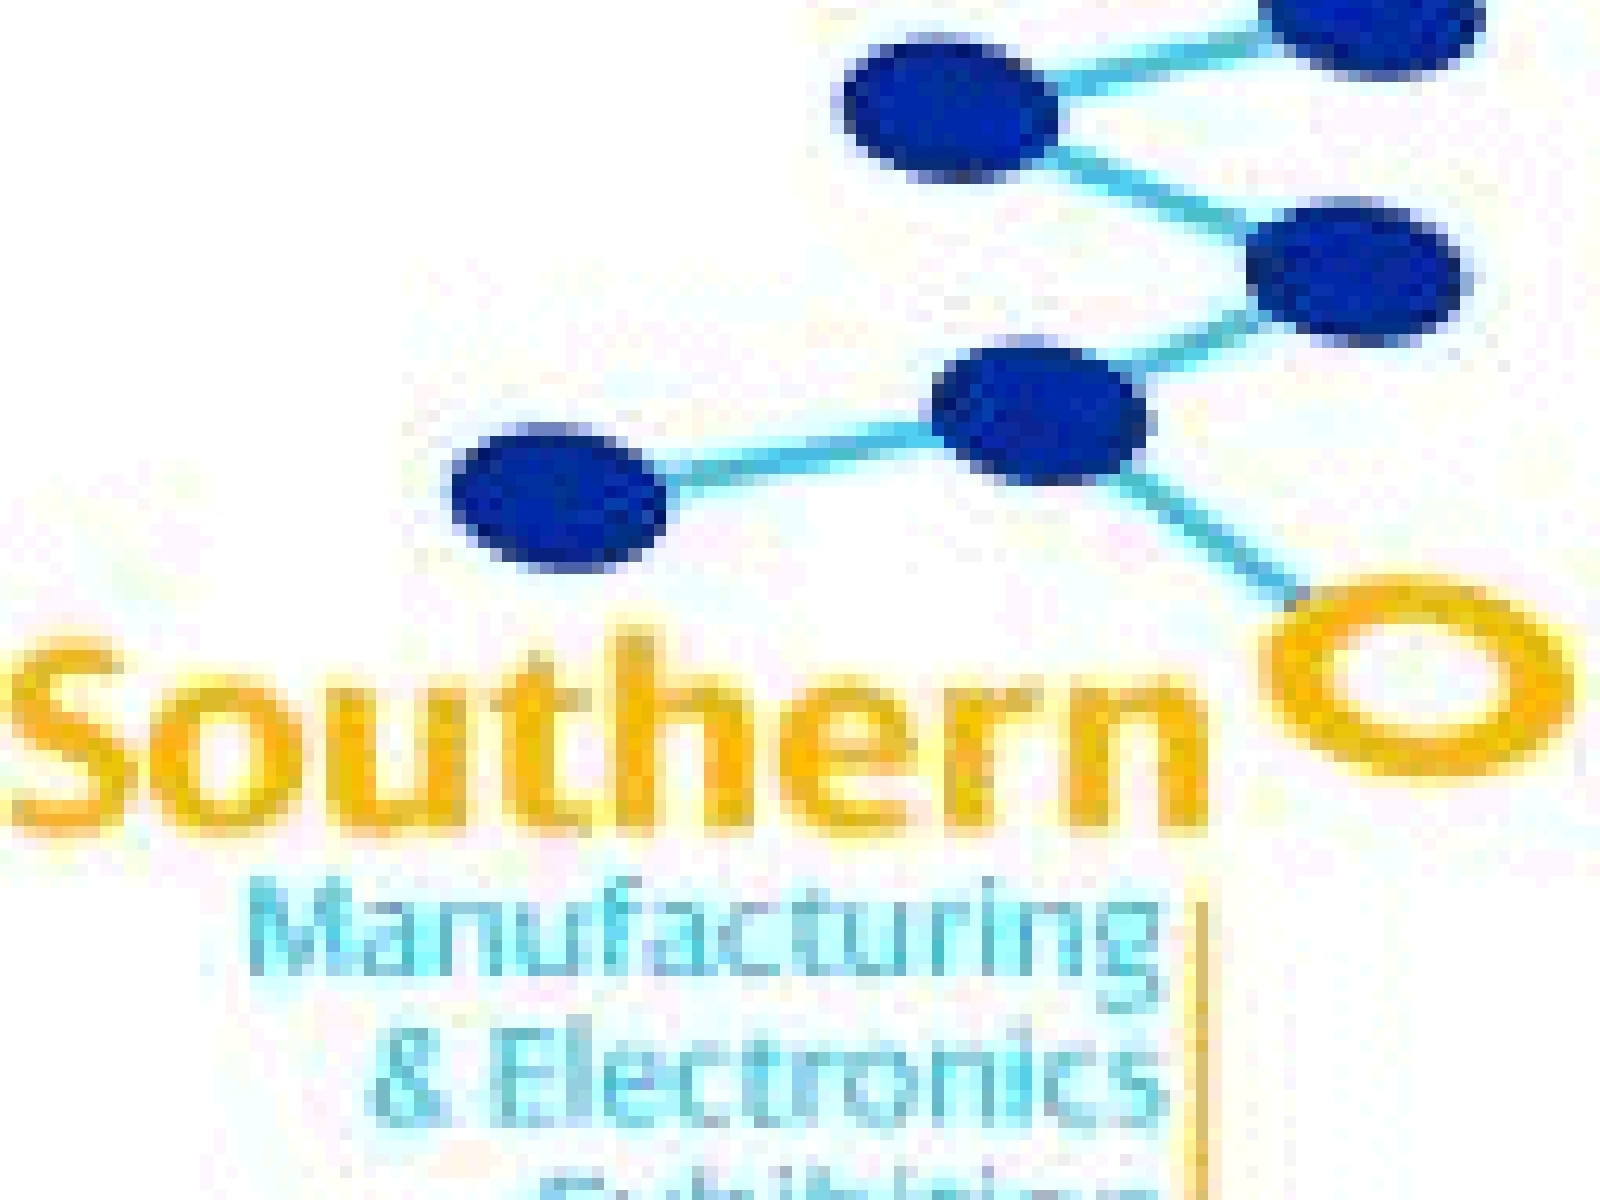 Southern Manufacturing 2012